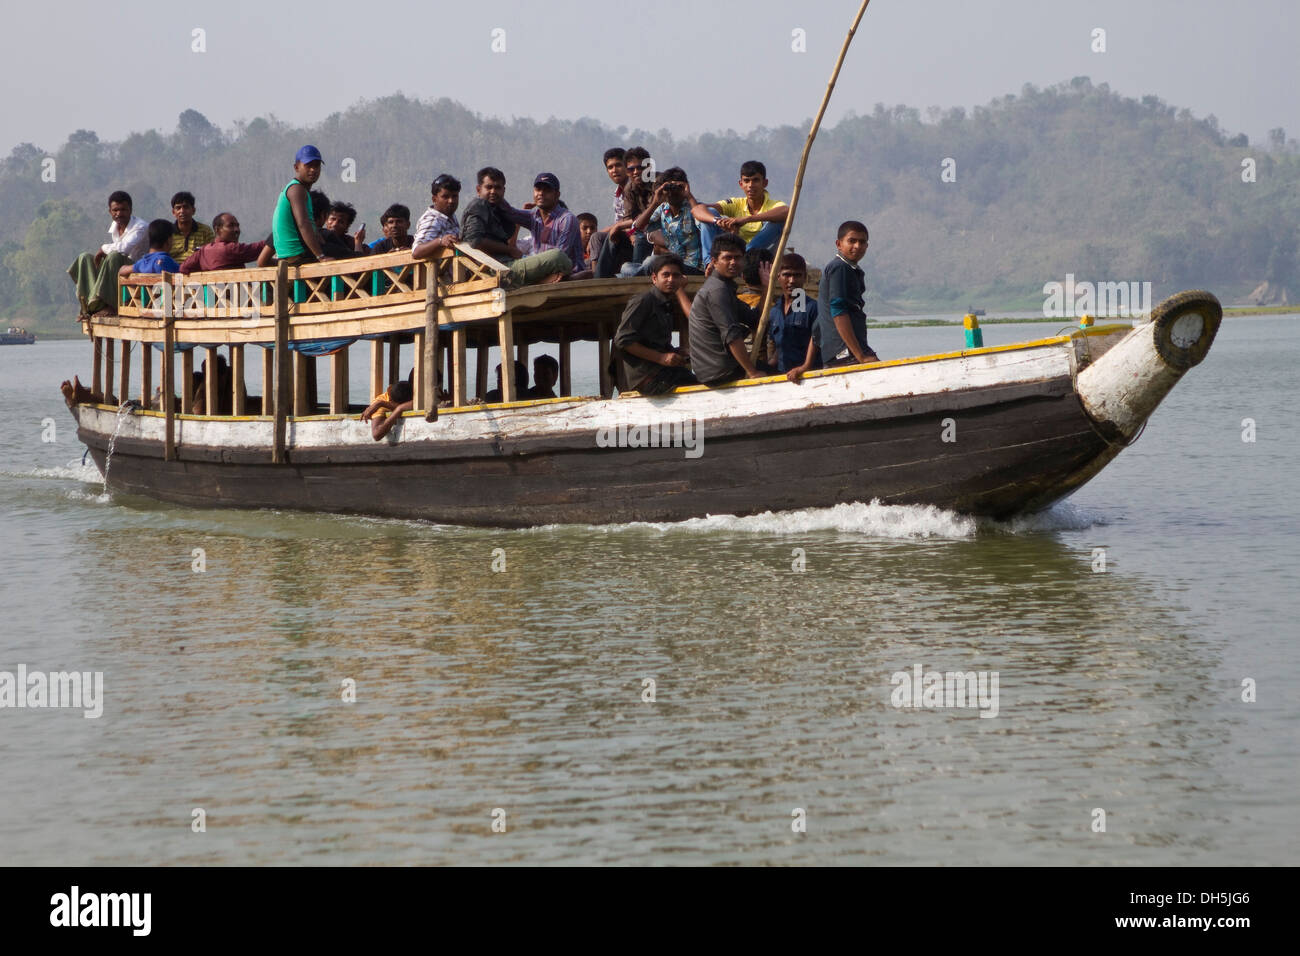 People sitting on the roof of a ferry boat, Kaptai Lake, Rangamati, Chittagong Hill Tracts, Bangladesh, South Asia, Asia Stock Photo